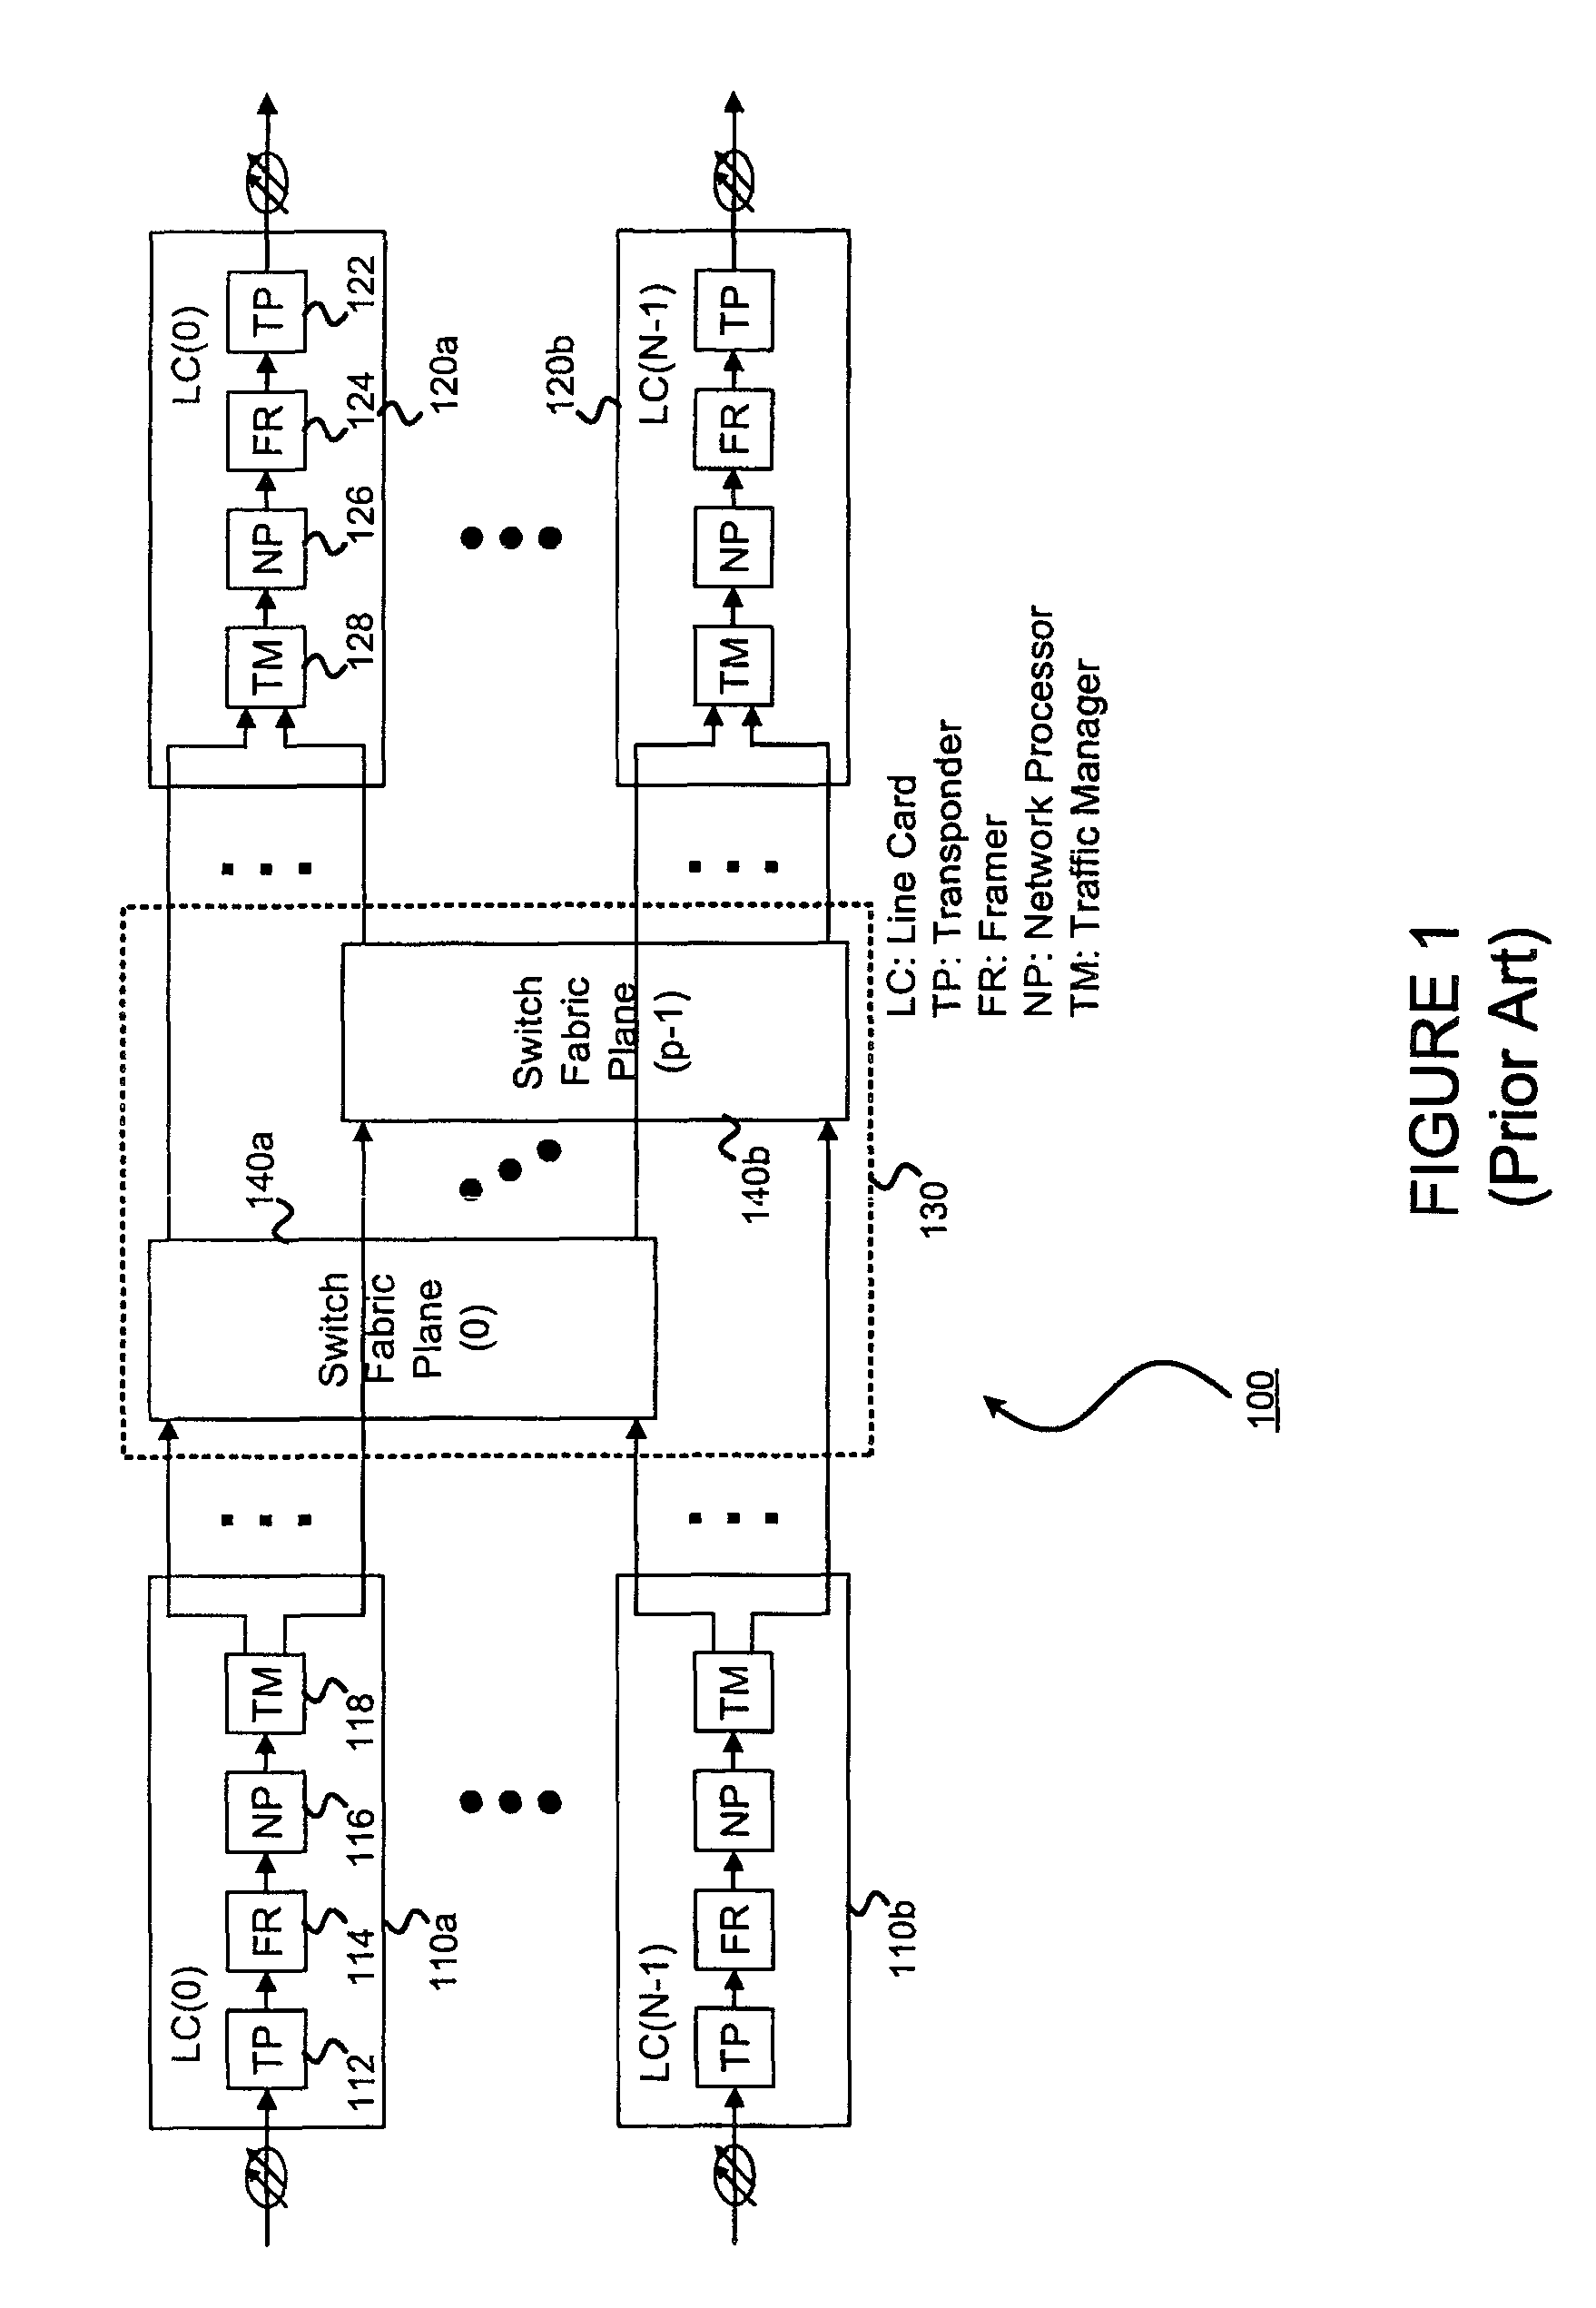 Switch module memory structure and per-destination queue flow control for use in a switch